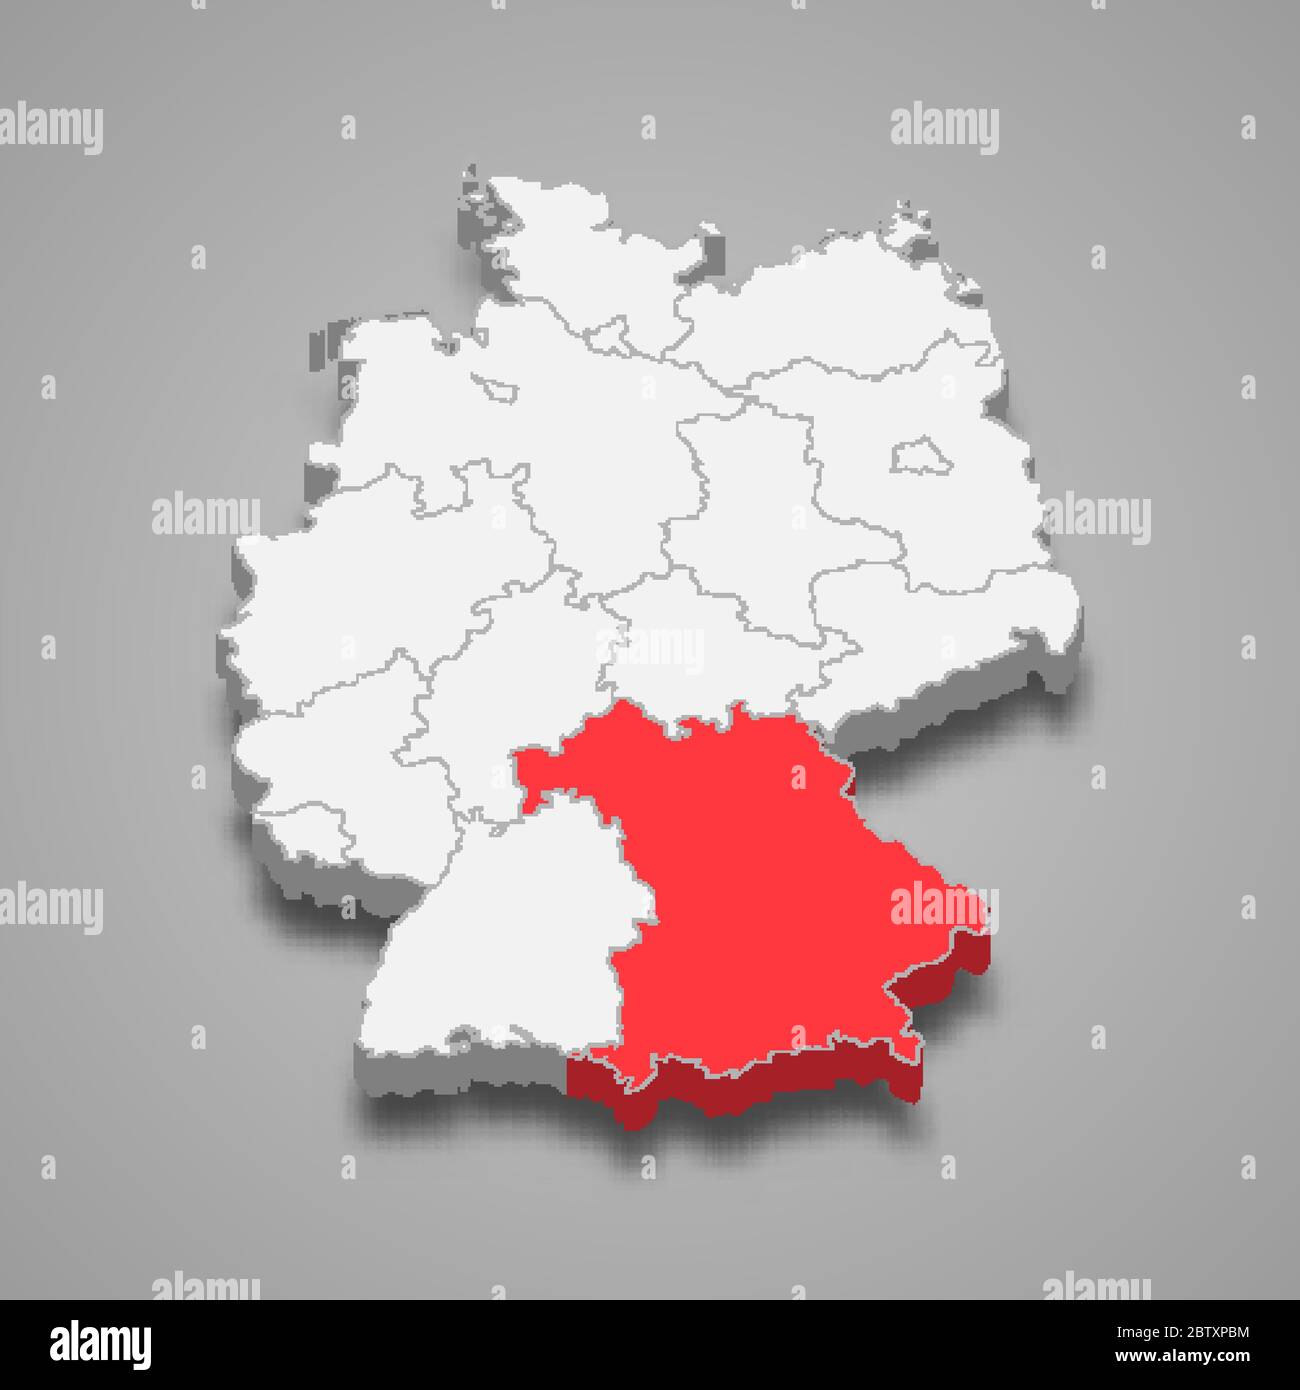 Bavaria state location within Germany 3d map Stock Vector